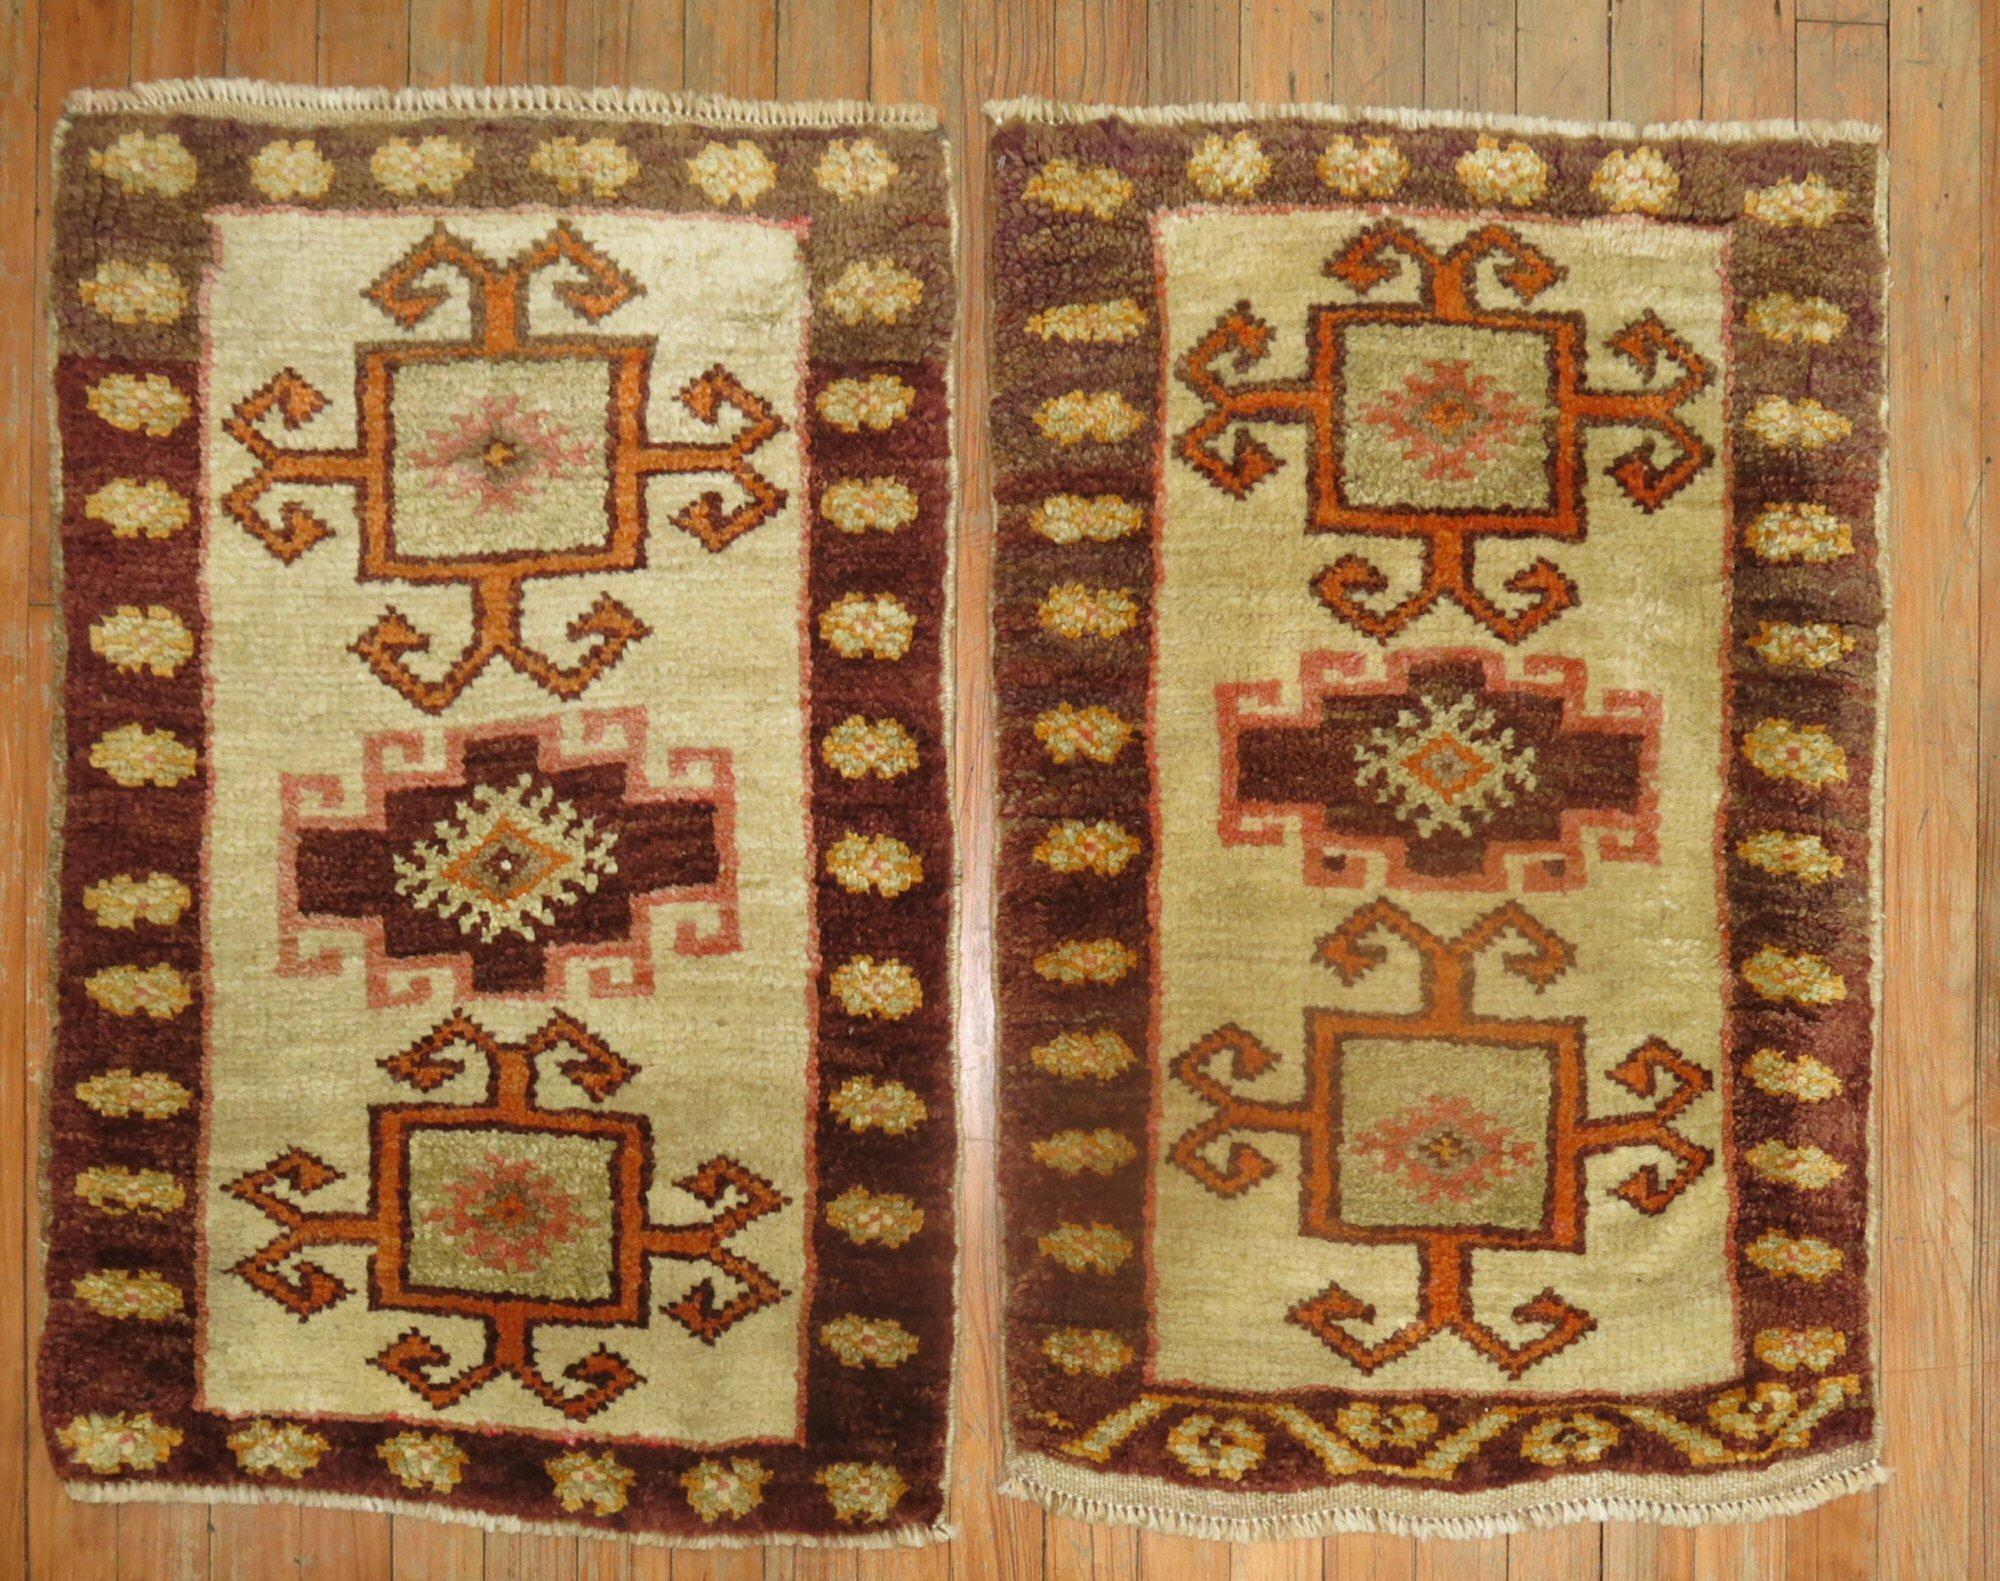 A matching pair of mid-20th century Turkish Kars rugs with tribal motifs

Both Measuring 22” x 33” 